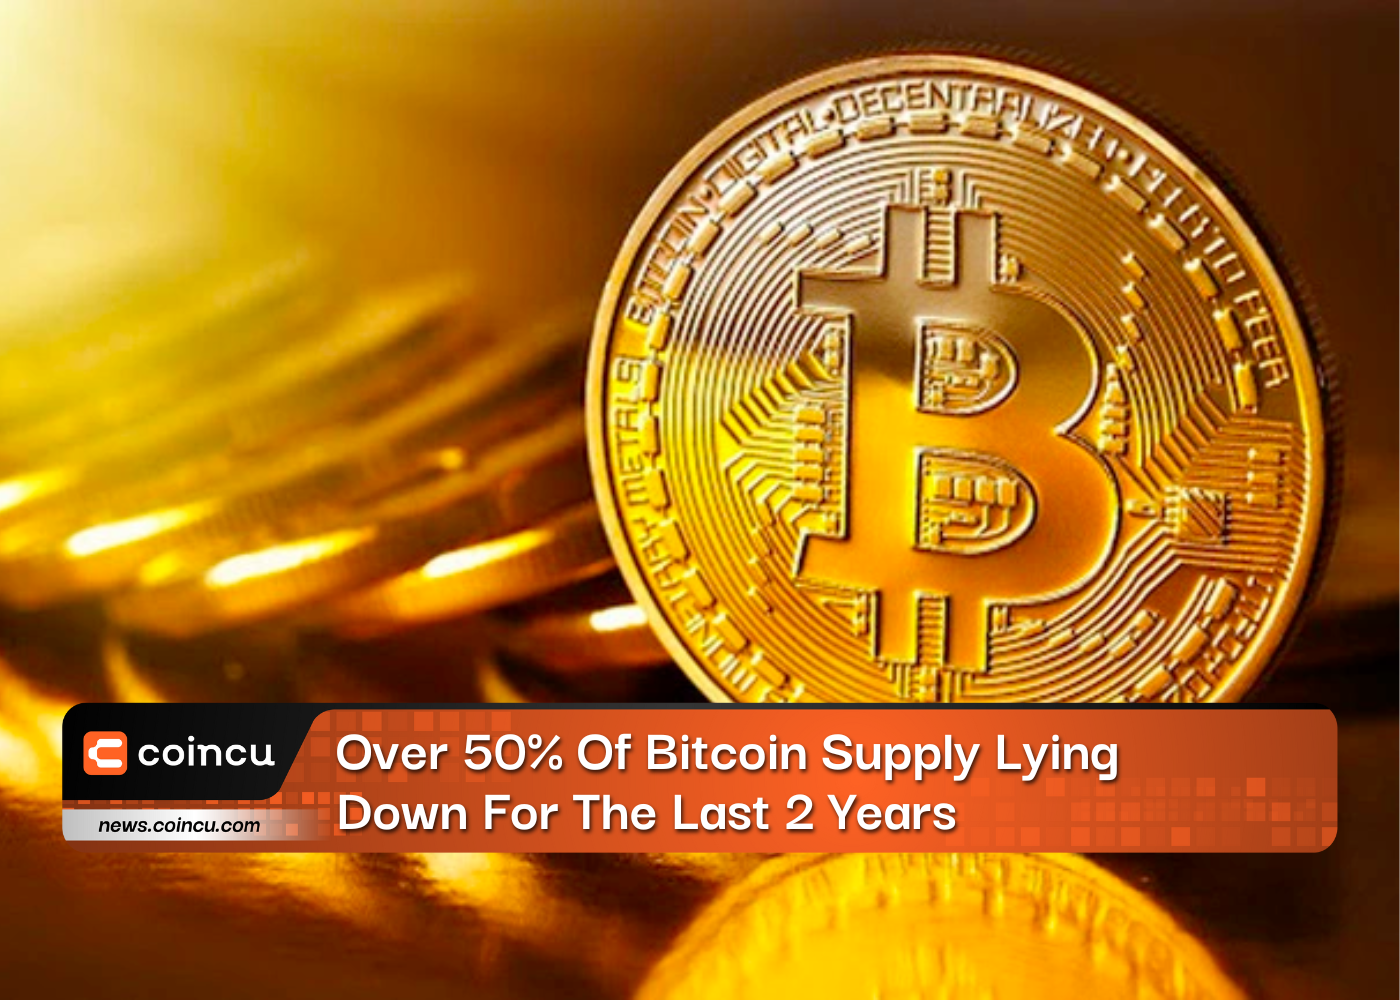 Over 50% Of Bitcoin Supply Lying Down For The Last 2 Years